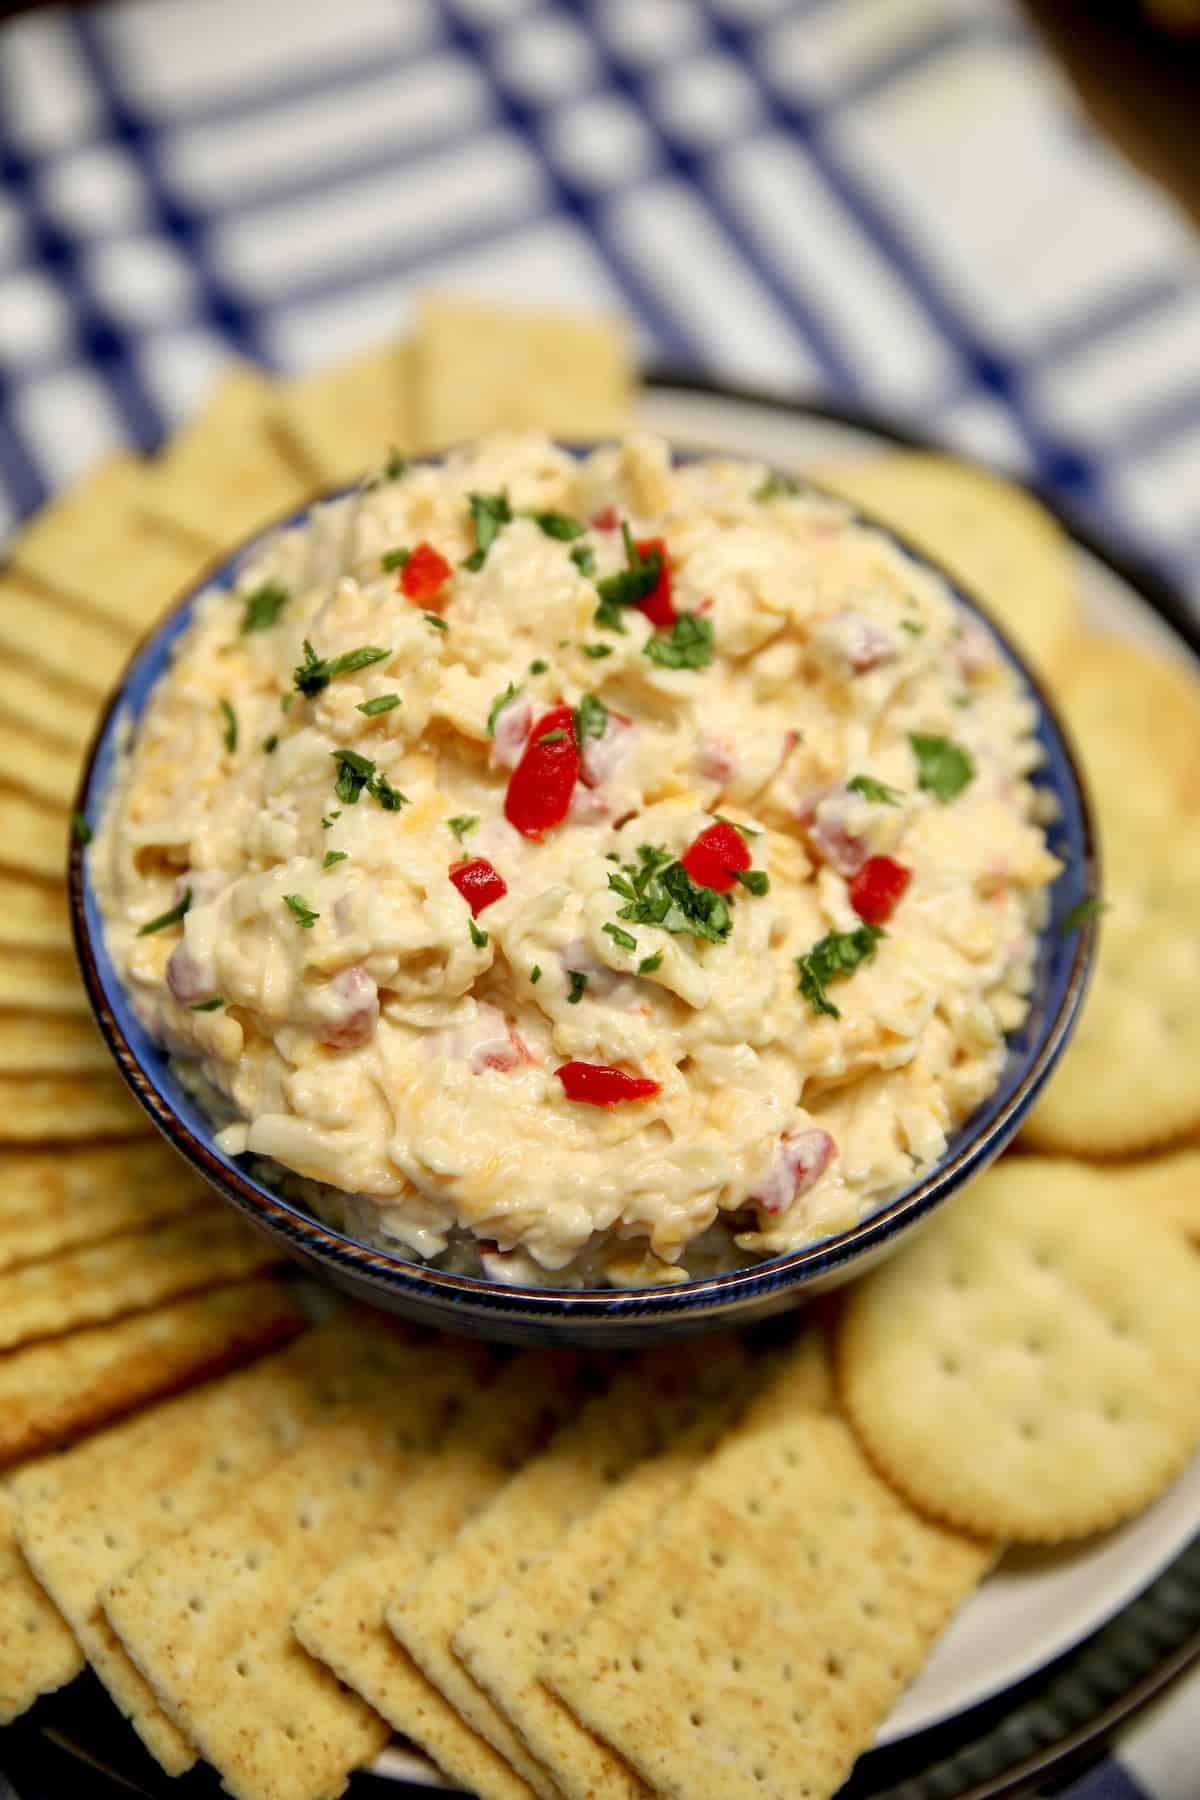 Bowl of pimento cheese dip with crackers.